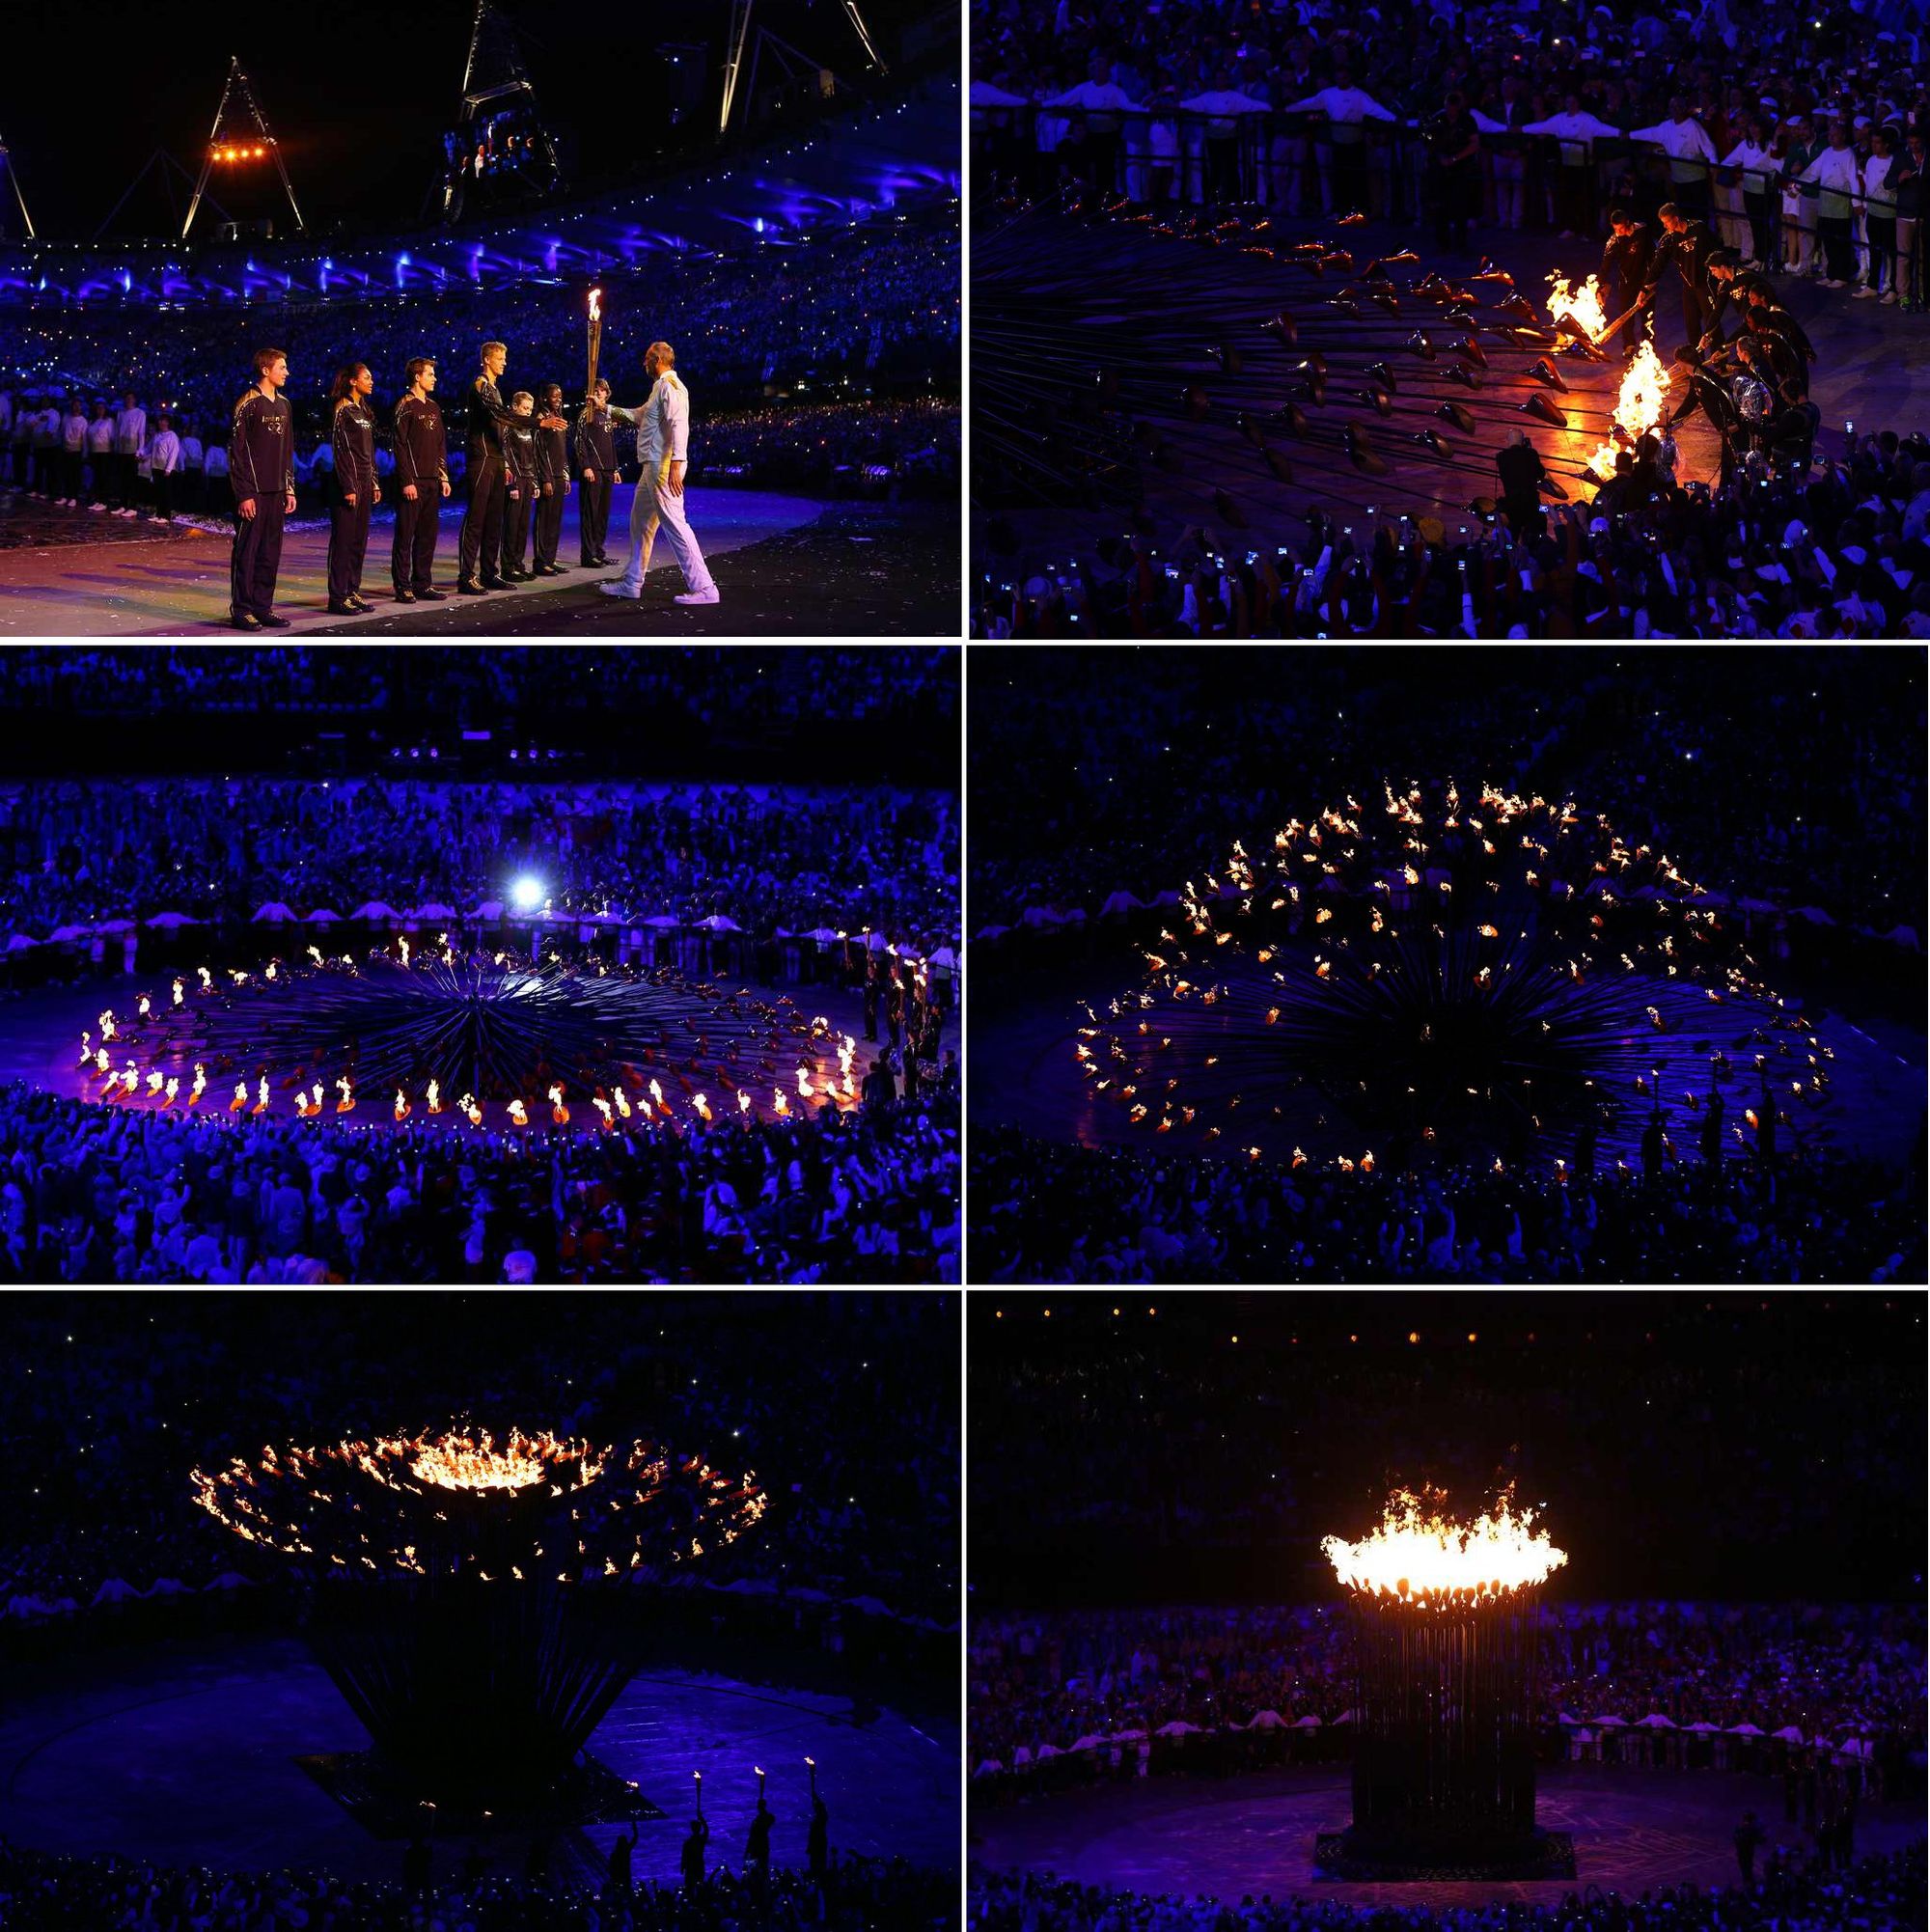 The lighting of the Olympic Cauldron sequence at the London 2012 Olympics Opening Ceremony